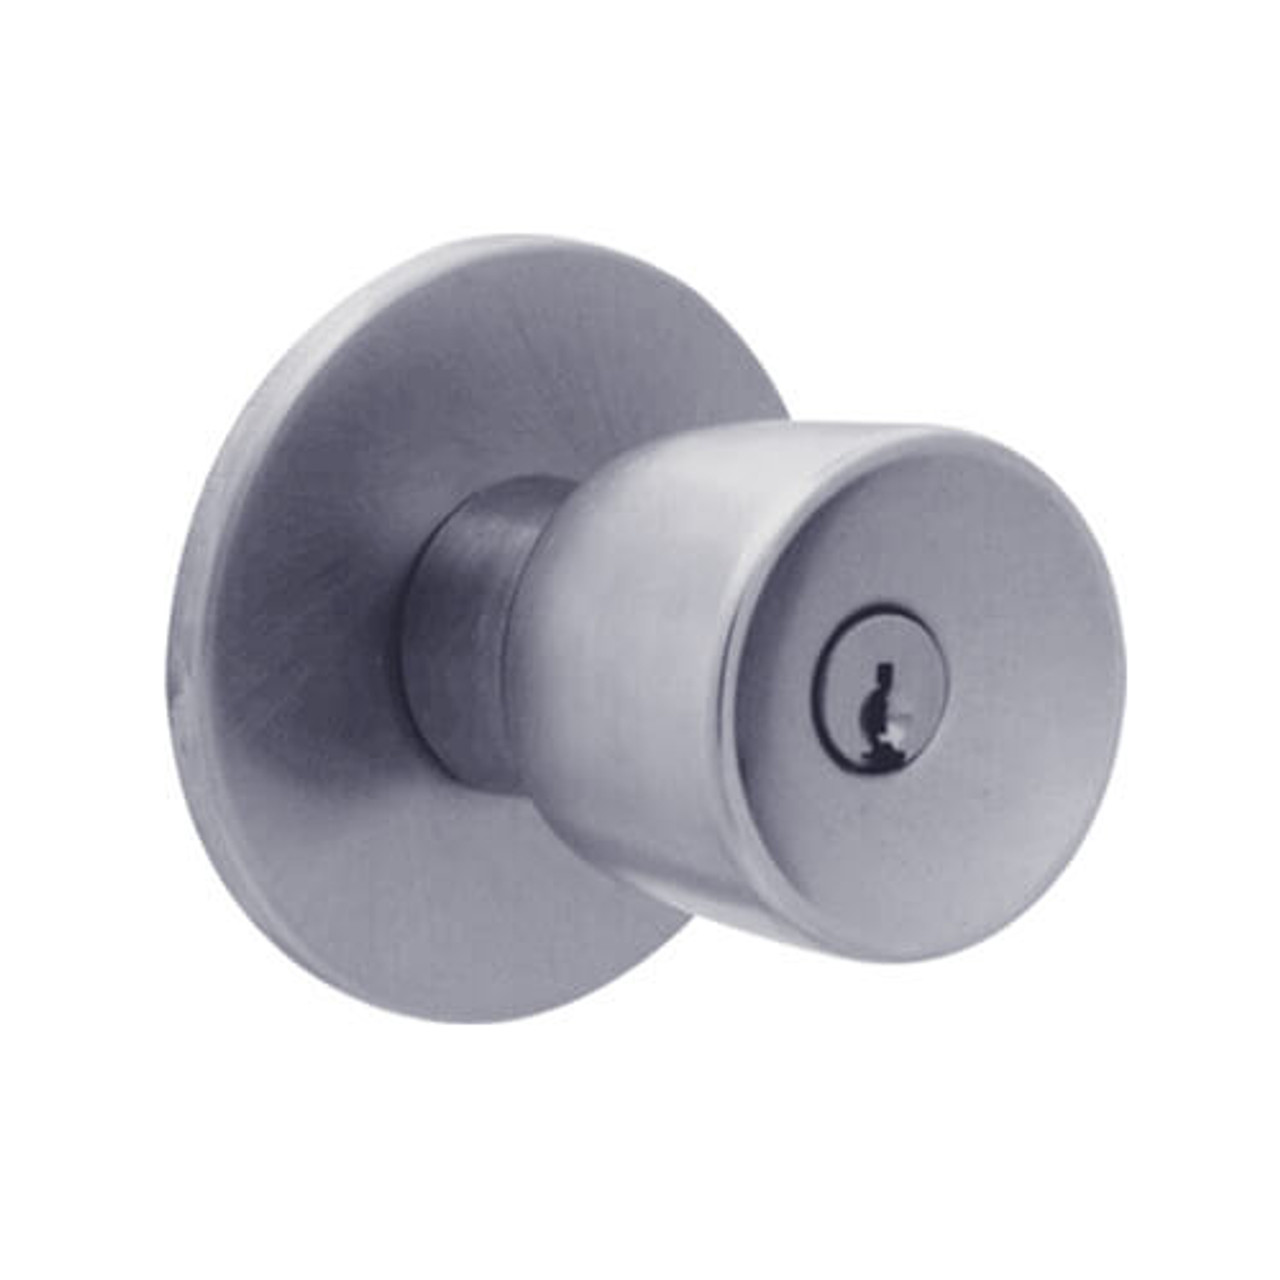 X561PD-EY-626 Falcon X Series Cylindrical Classroom Lock with Elite-York Knob Style in Satin Chrome Finish